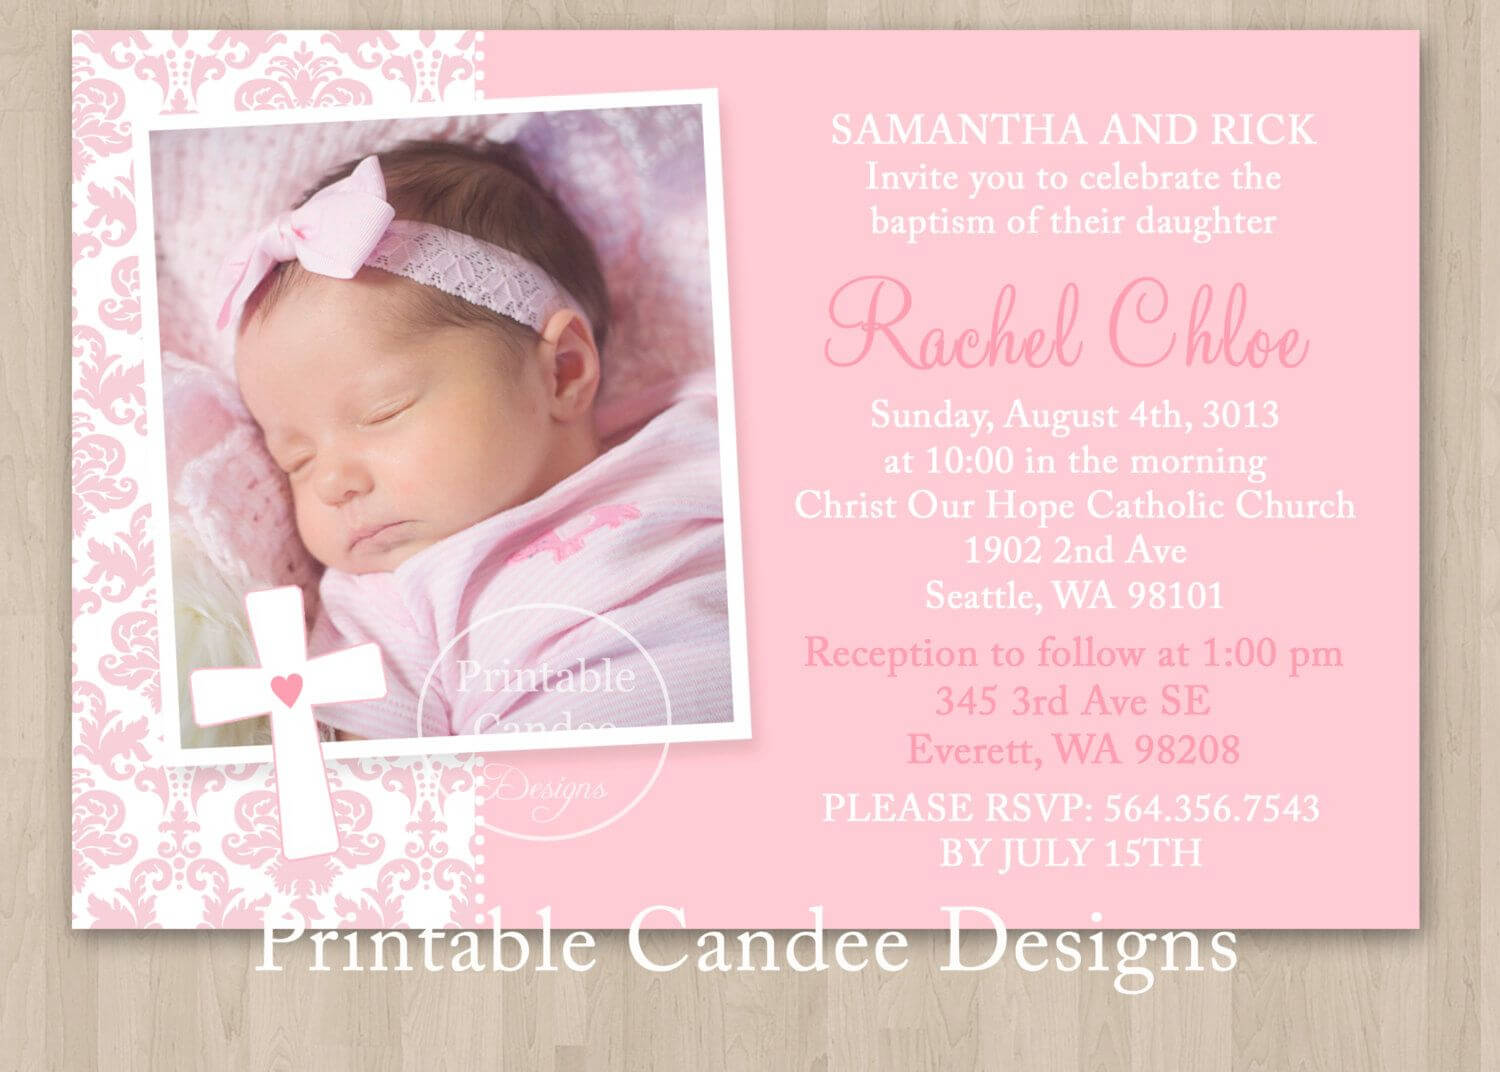 Printable Christening Invitations Templates | Projects To Intended For Free Christening Invitation Cards Templates